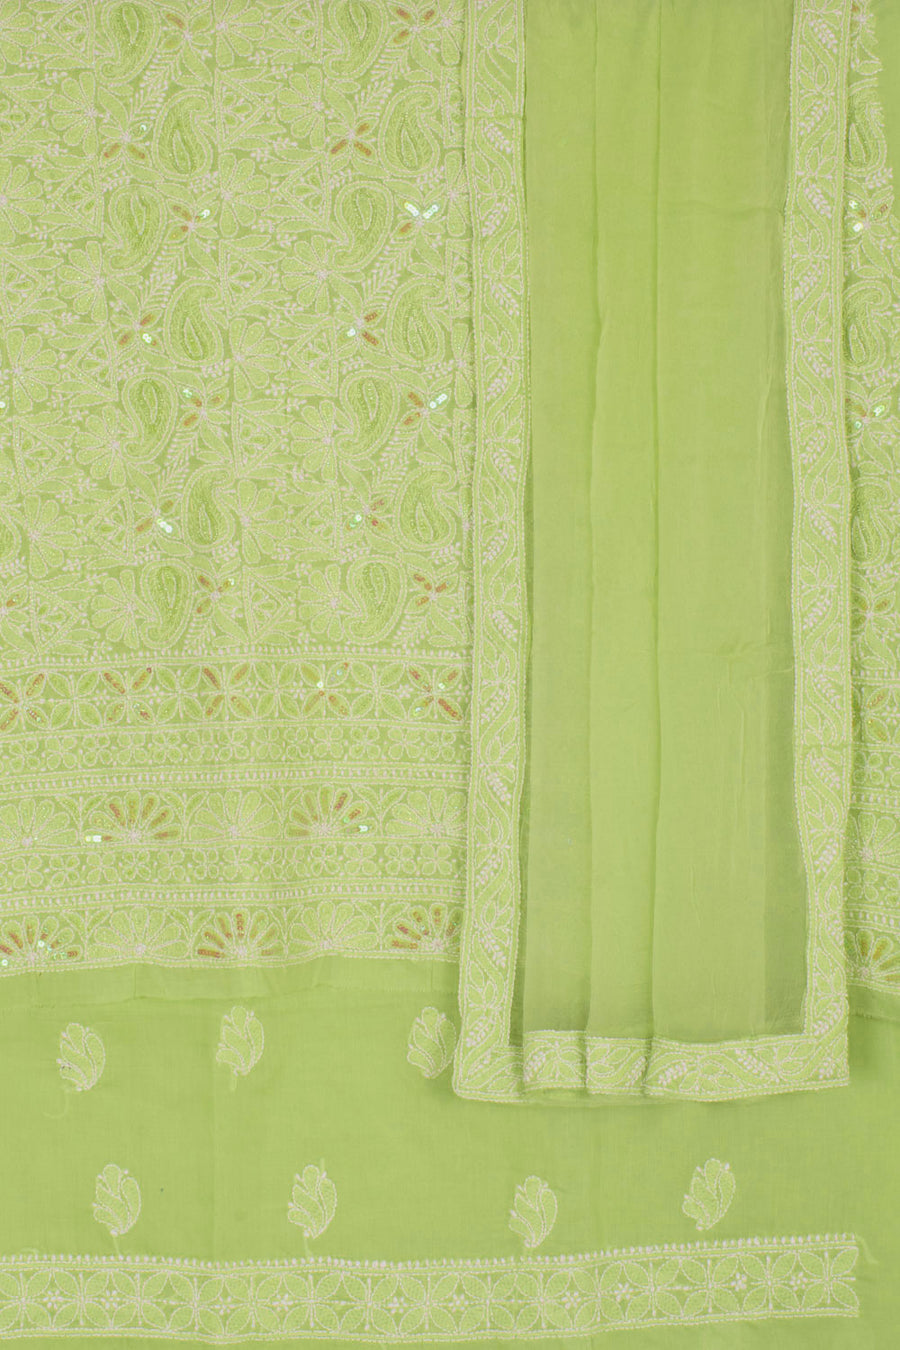 Hand Embroidered Chikankari Cotton 3-Piece Salwar Suit Material with Sequin, Bead Work and Chiffon Dupatta